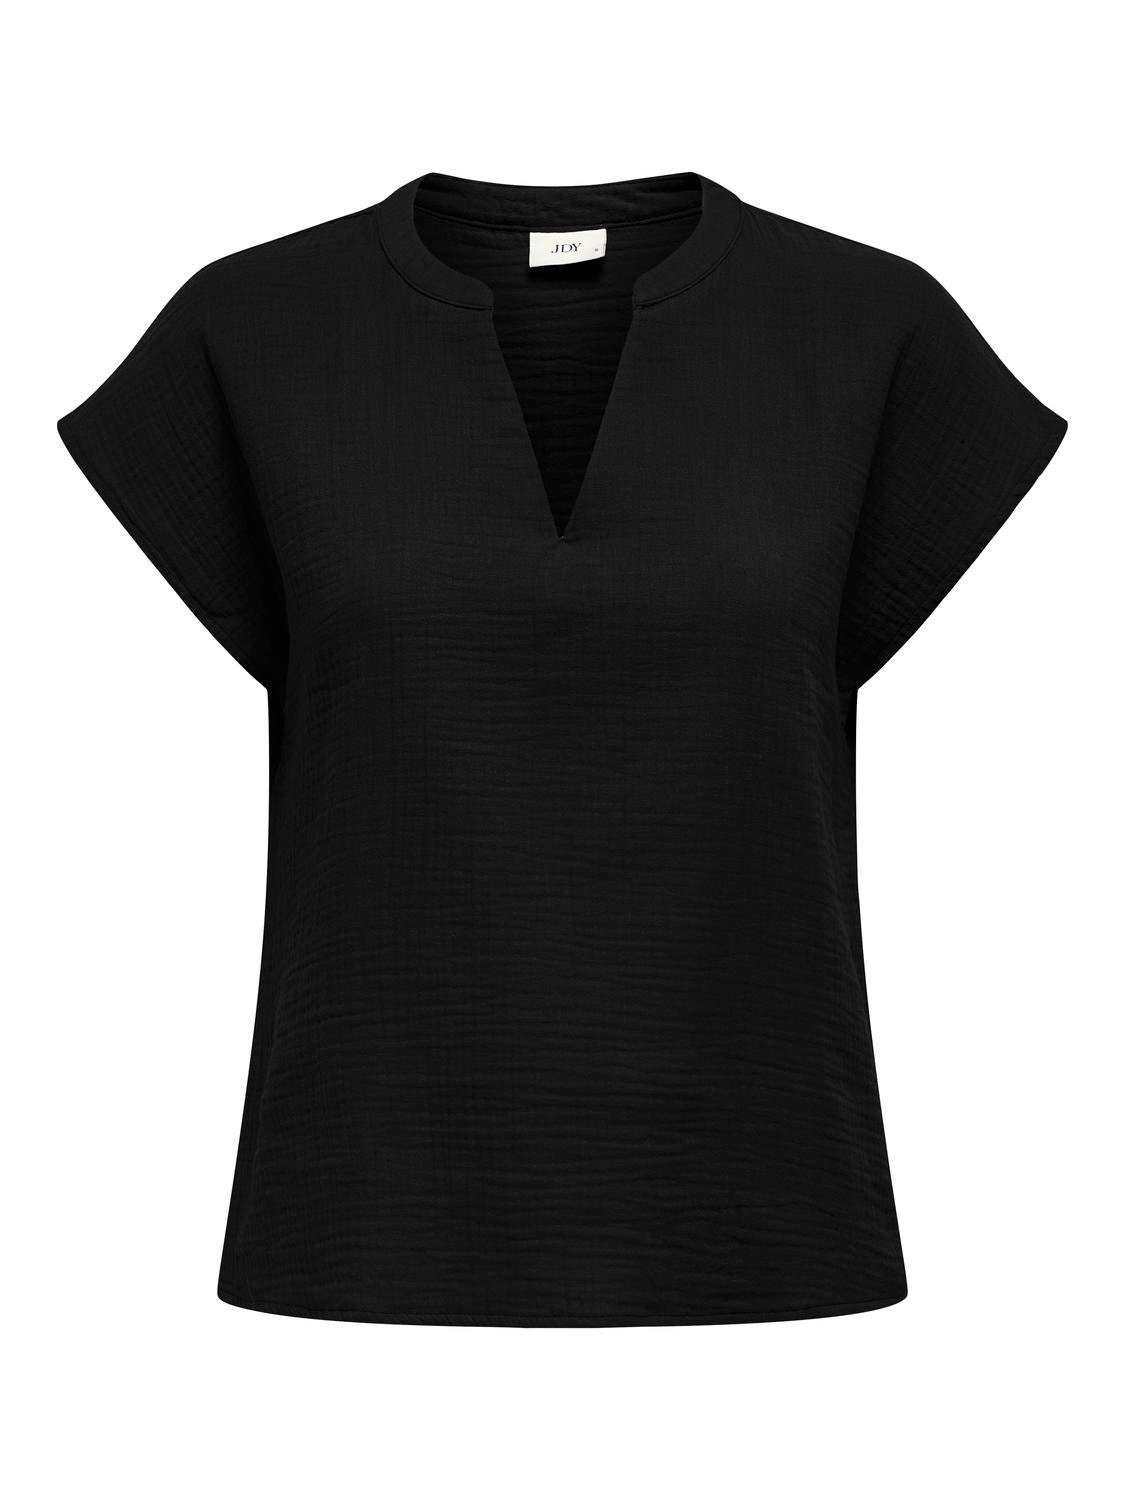 ONLY Top with bell sleeves -Black - 15317398